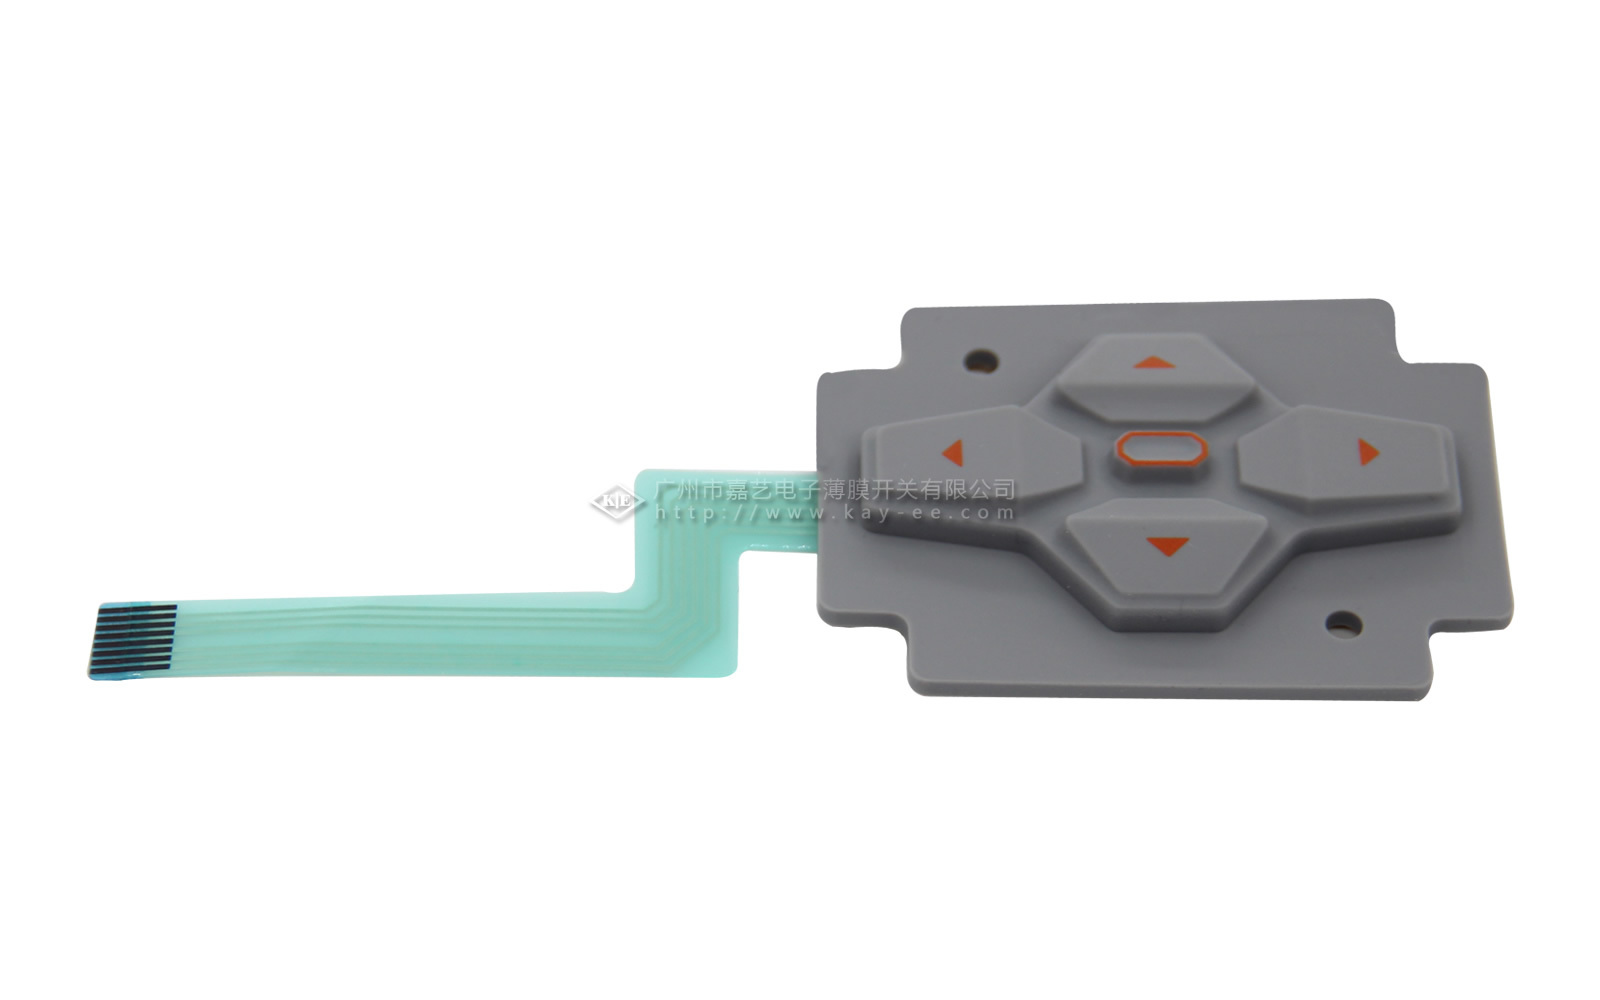 Silicone tactile switch_1